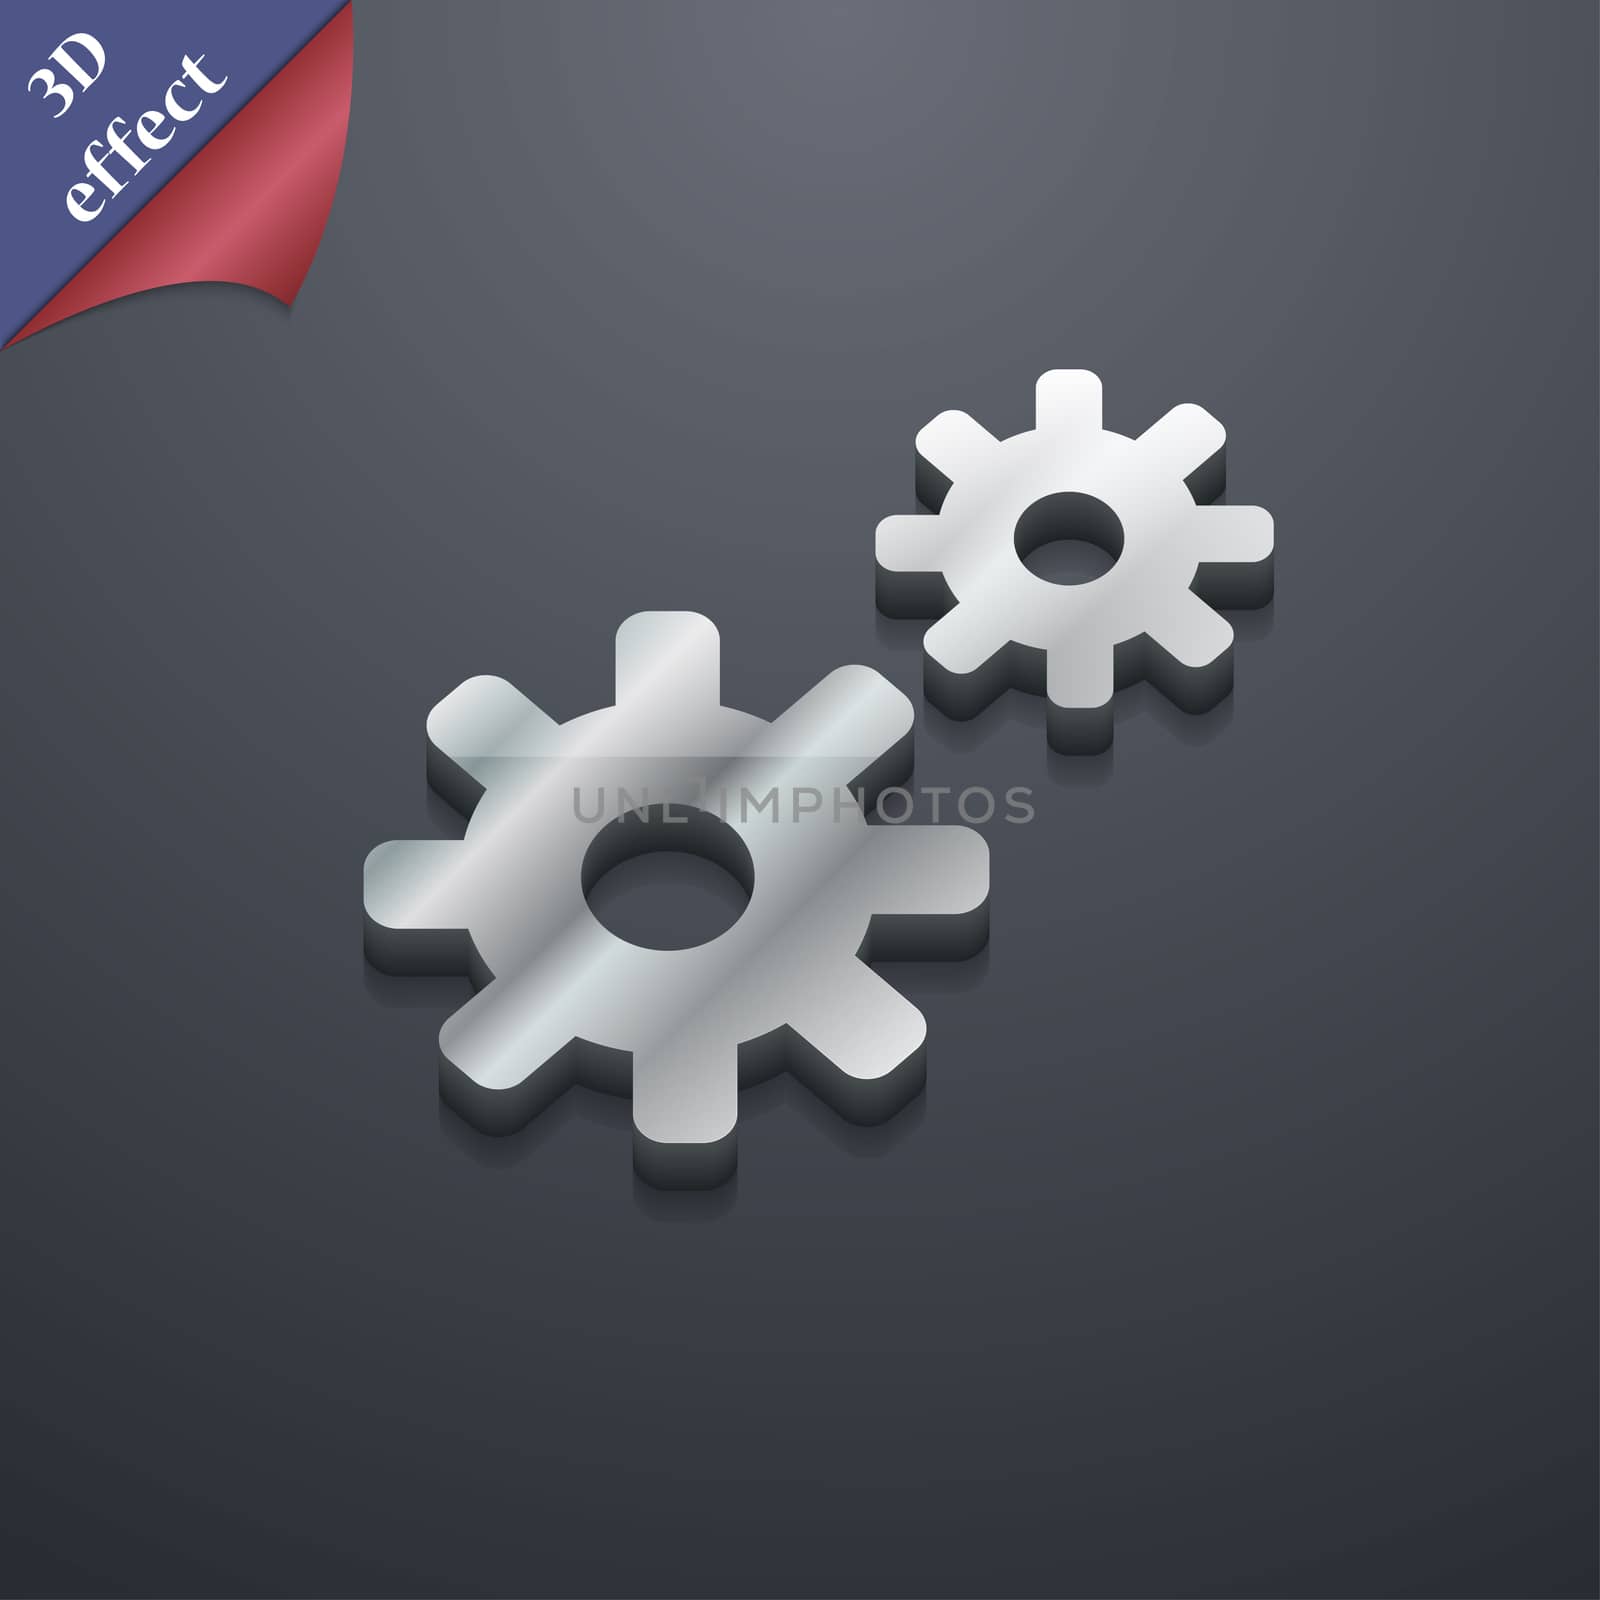 Cog settings, Cogwheel gear mechanism icon symbol. 3D style. Trendy, modern design with space for your text illustration. Rastrized copy